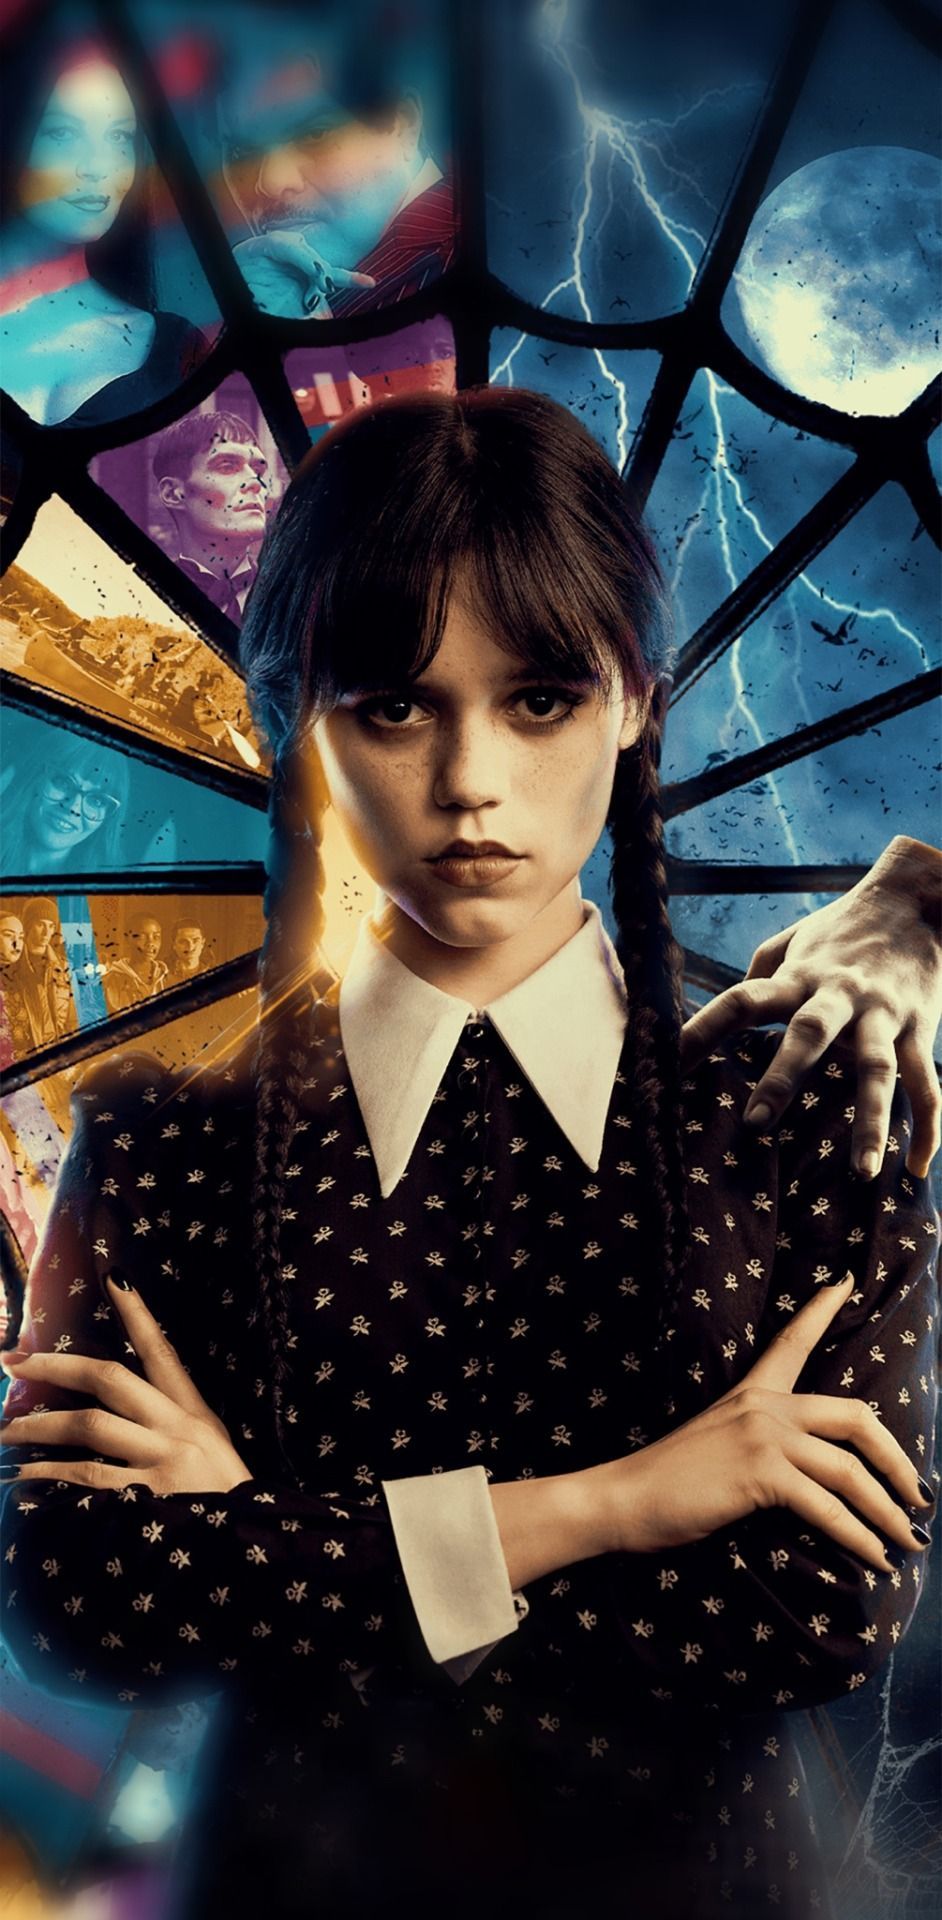 Wednesday Addams wallpaper for iPhone and Android - Wednesday